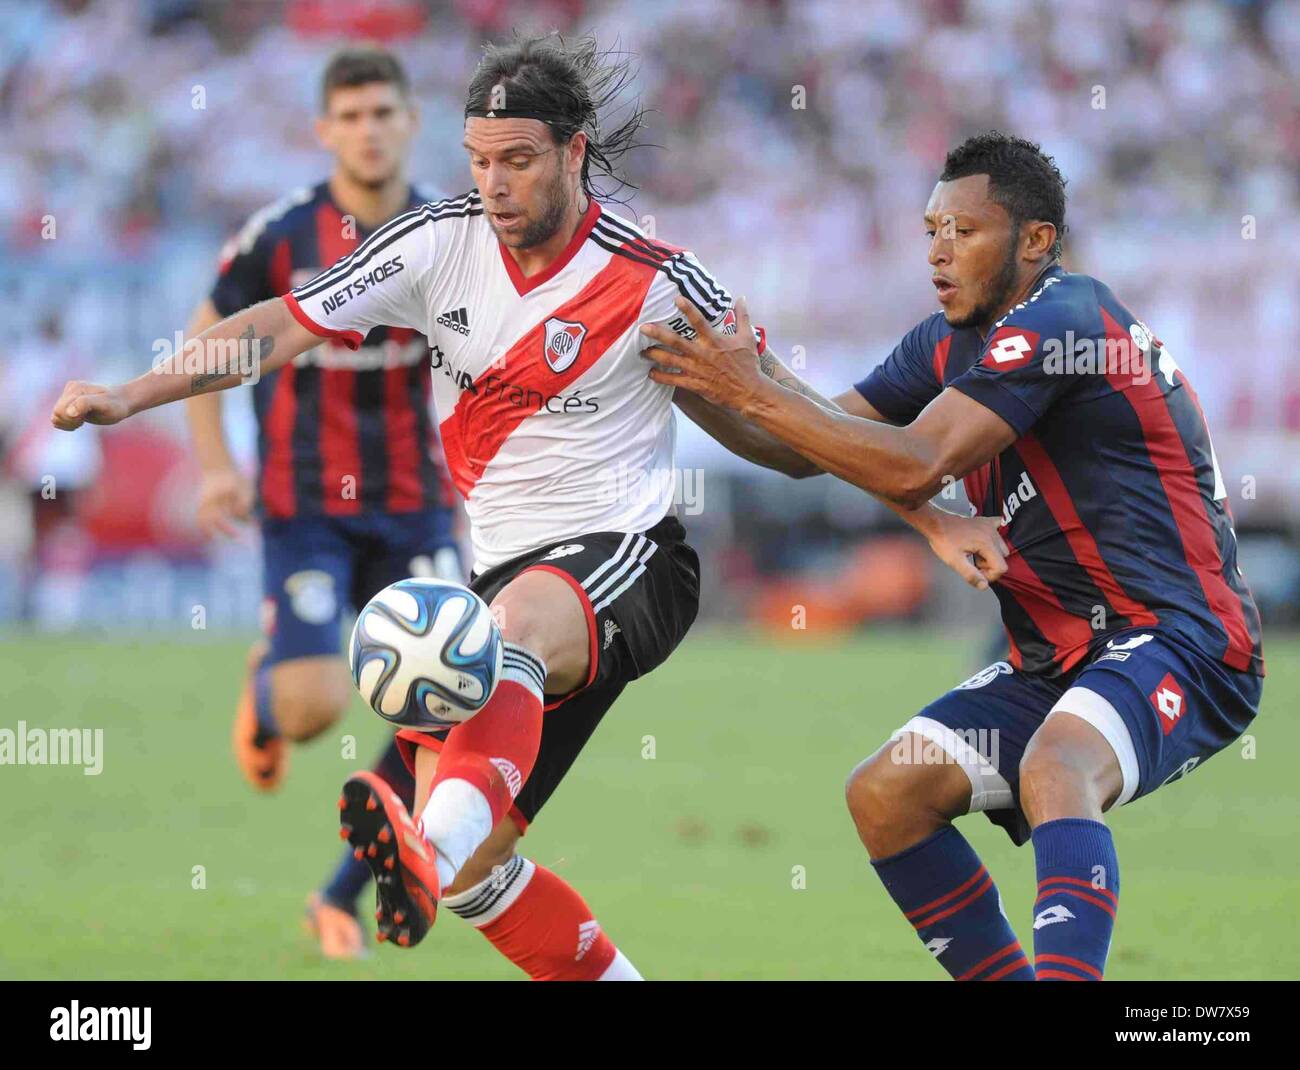 Buenos Aires, Argentina. 2nd Mar, 2014. Fernando Cavenaghi (L) of River Plate vies for the ball with Carlos Valdes (R) of San Lorenzo during their match of the Final Tournament held at Monumental Stadium, in Buenos Aires, Argentina, on March 2, 2014. Credit:  Maximiliano Luna/TELAM/Xinhua/Alamy Live News Stock Photo